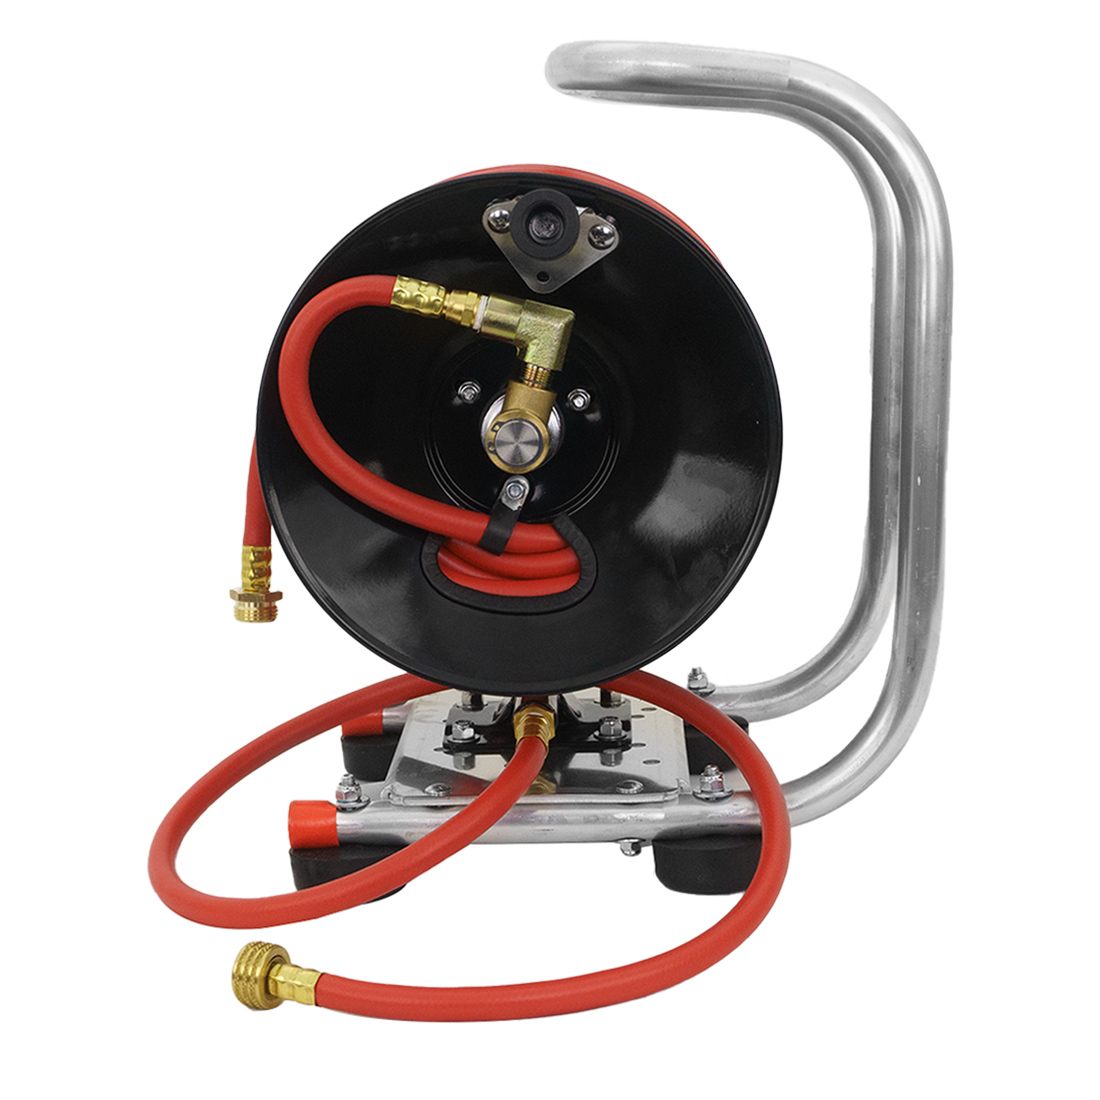 XERO Portable Hose Reel Assembly, Accessories